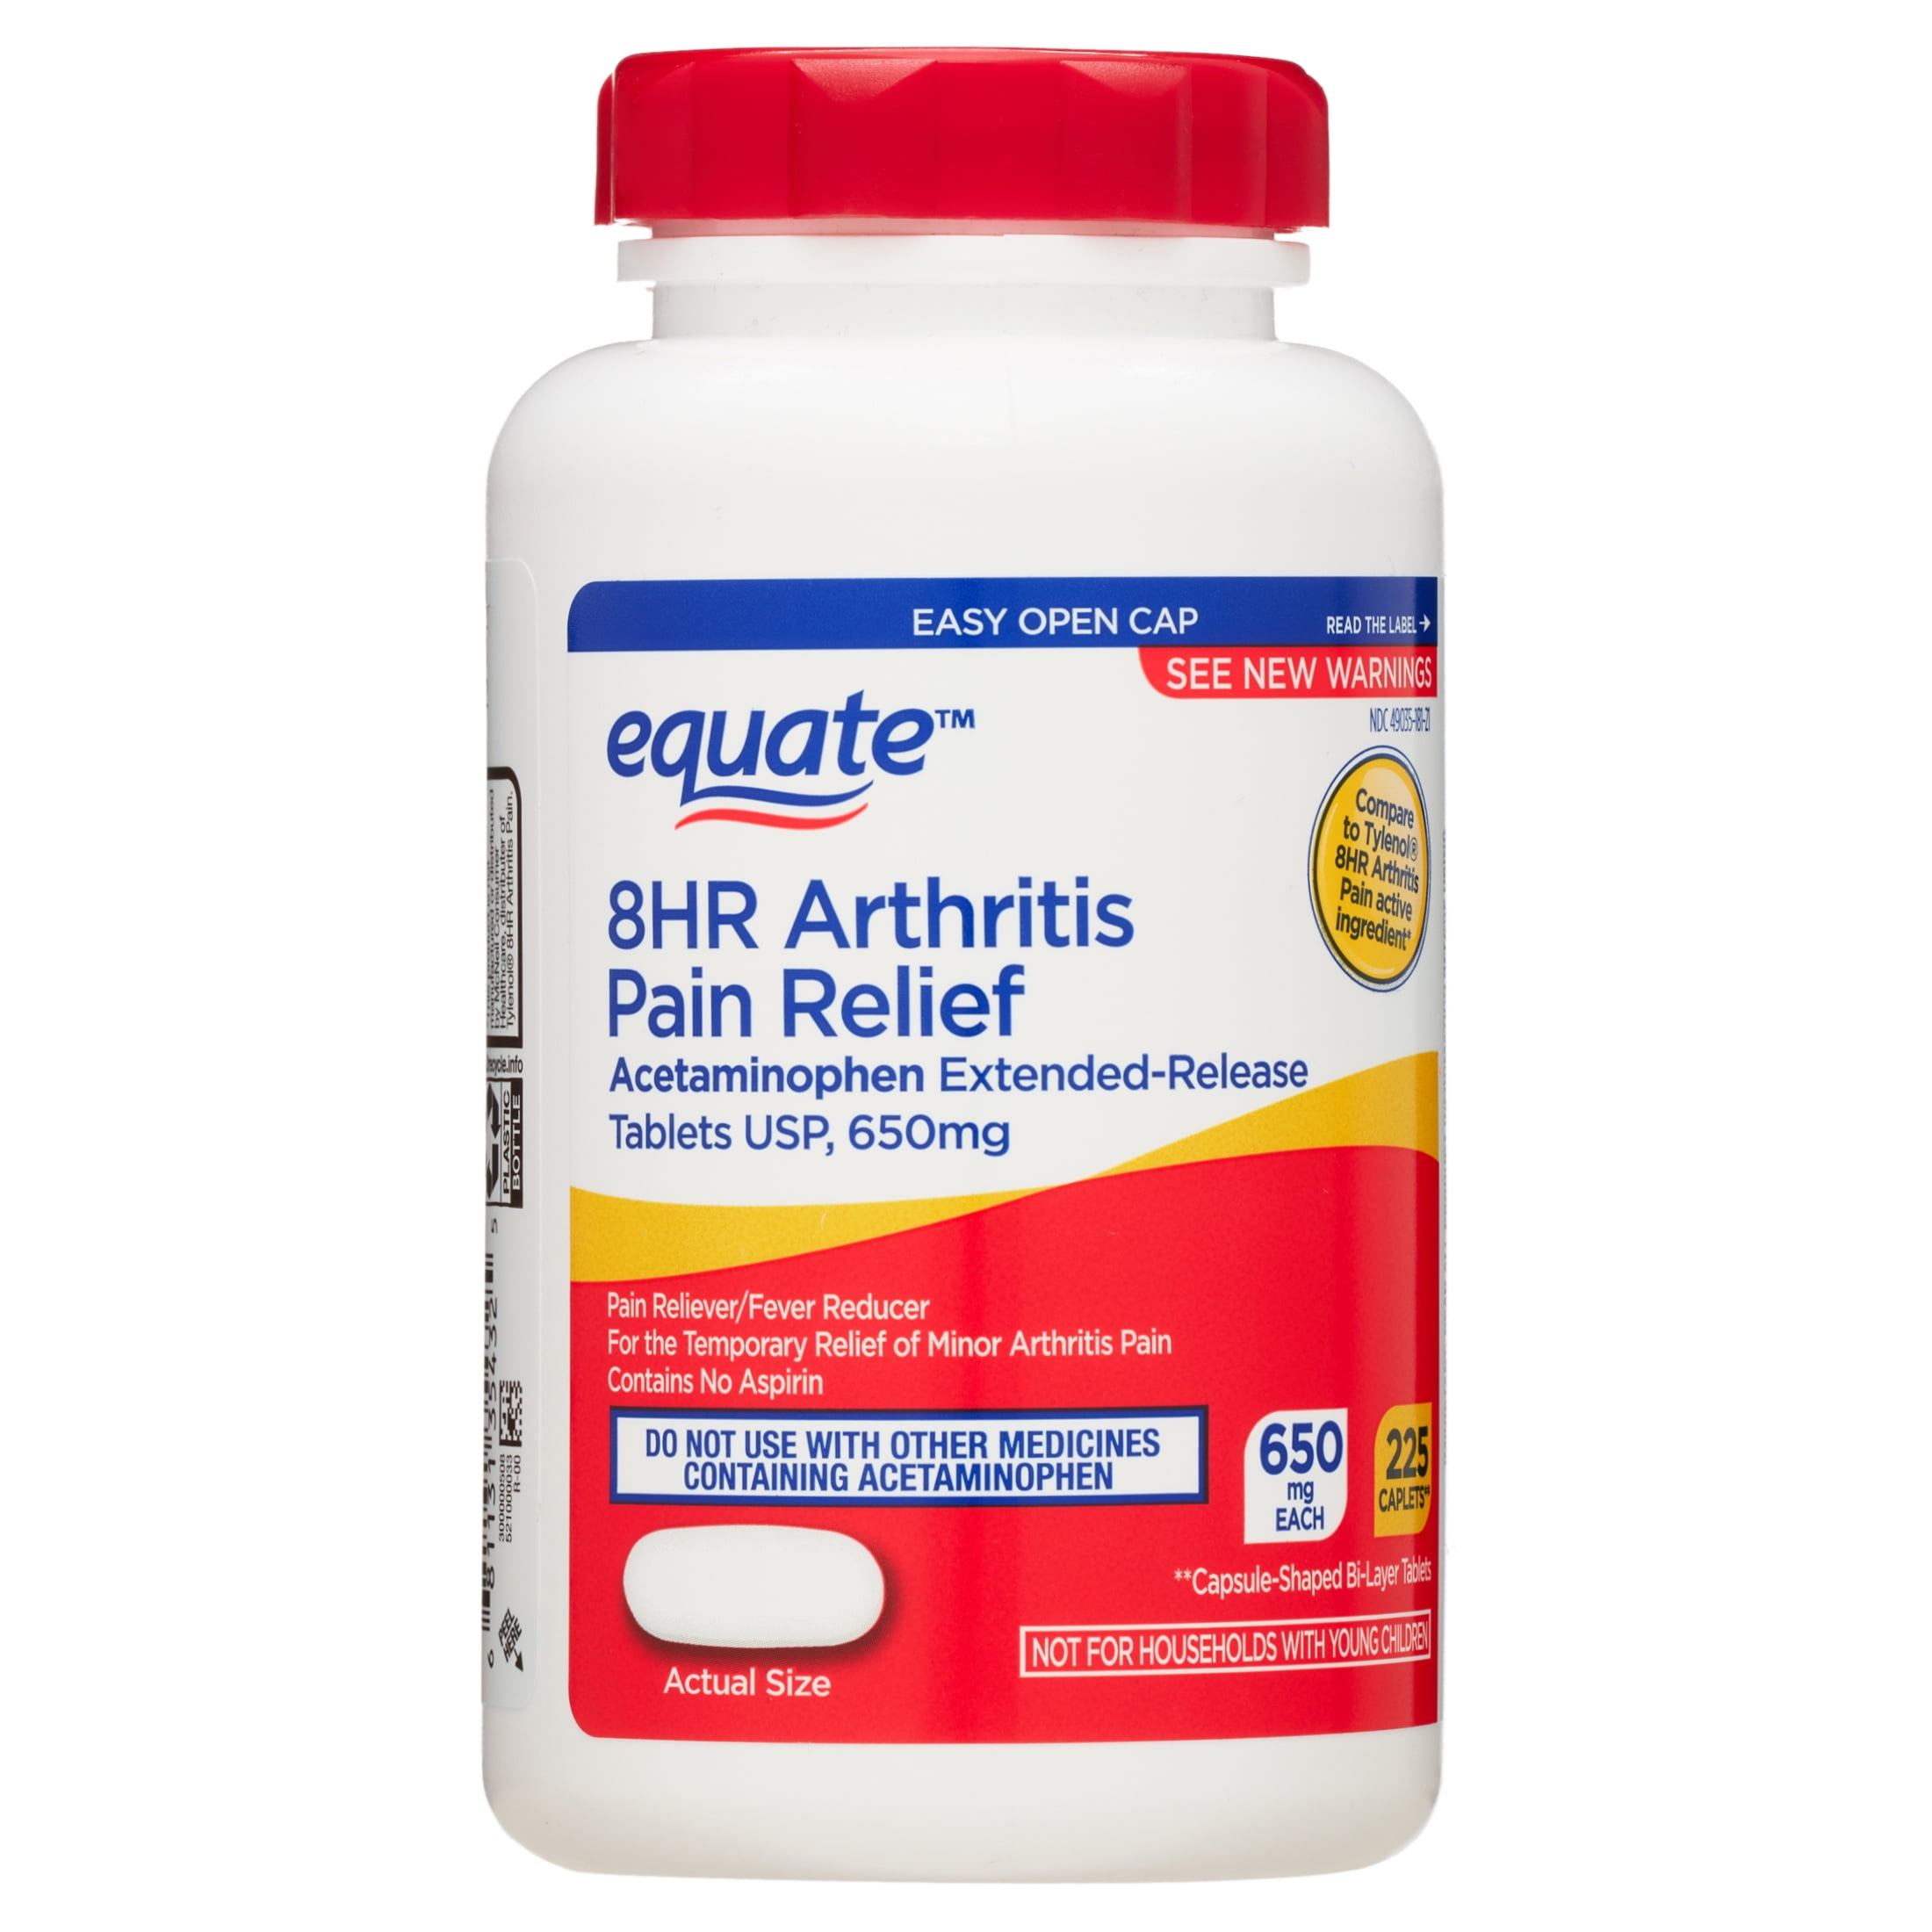 Equate Acetaminophen 8HR Arthritis Pain Relief Extended-Release Caplets, 650 mg, 225 Count